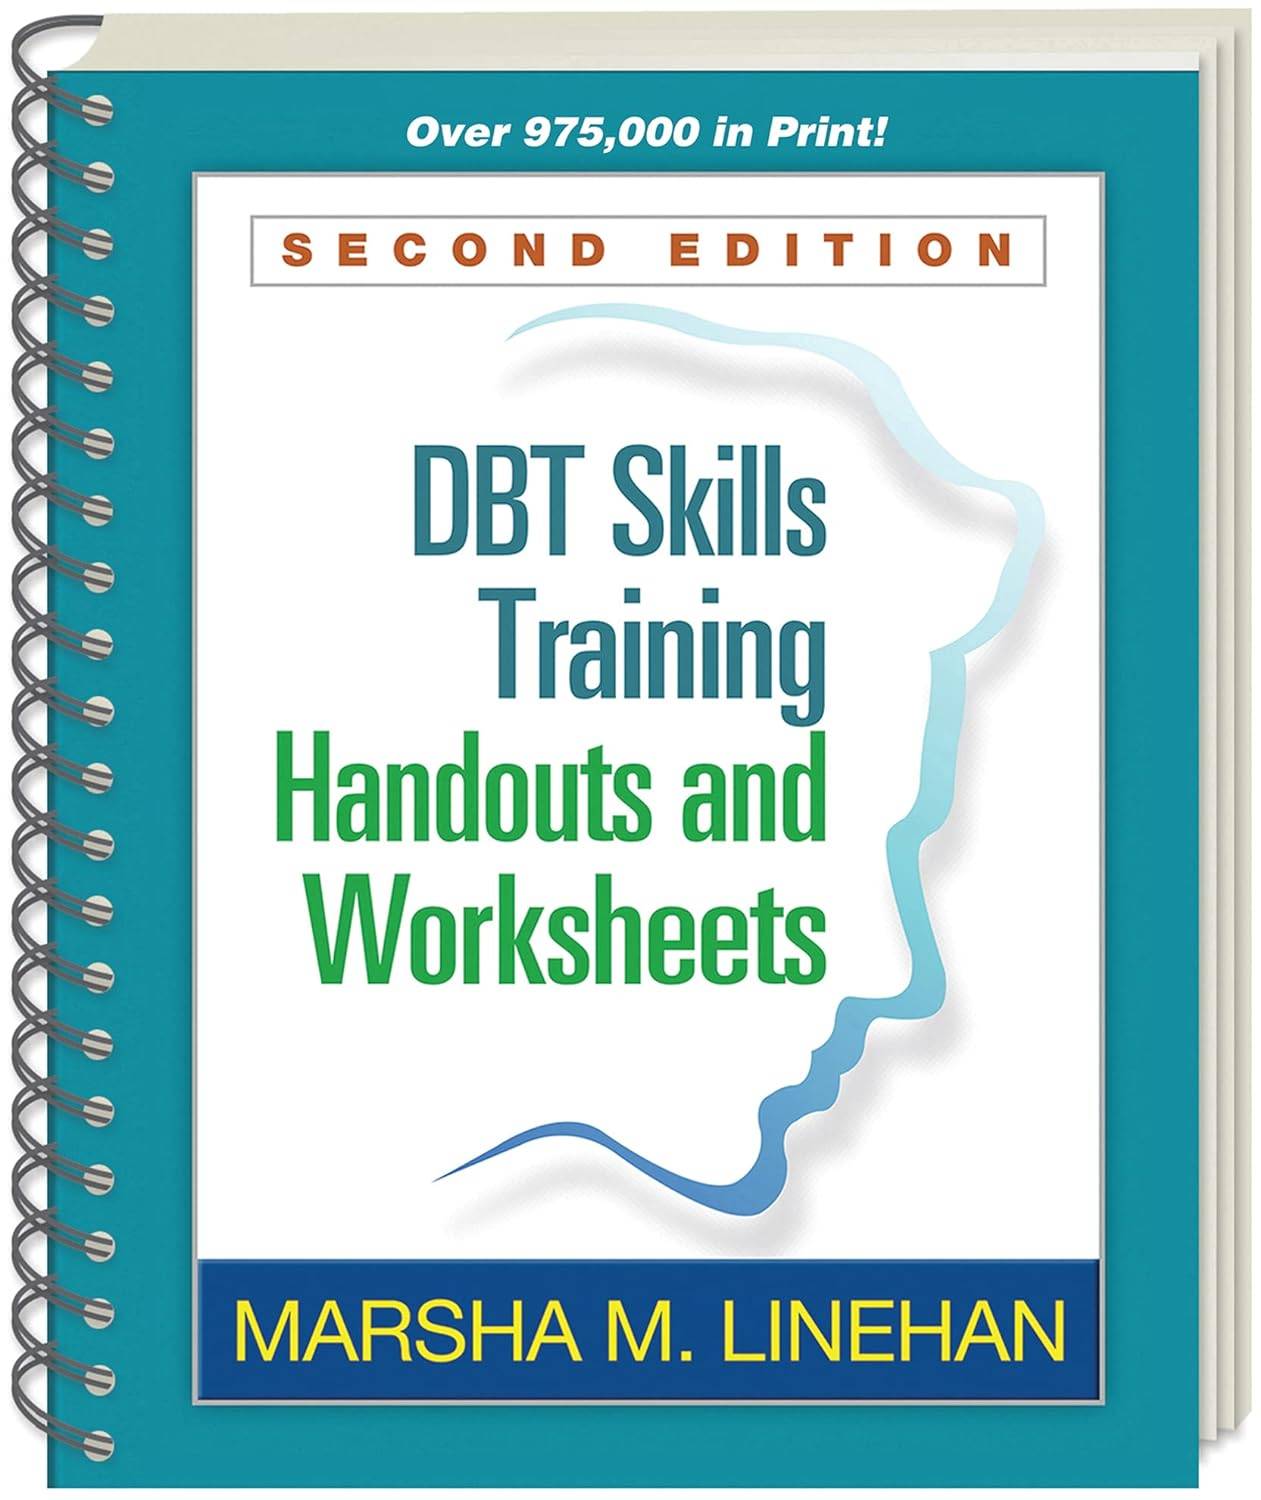 DBT Skills Training Handouts and Worksheets 2nd Edition Review